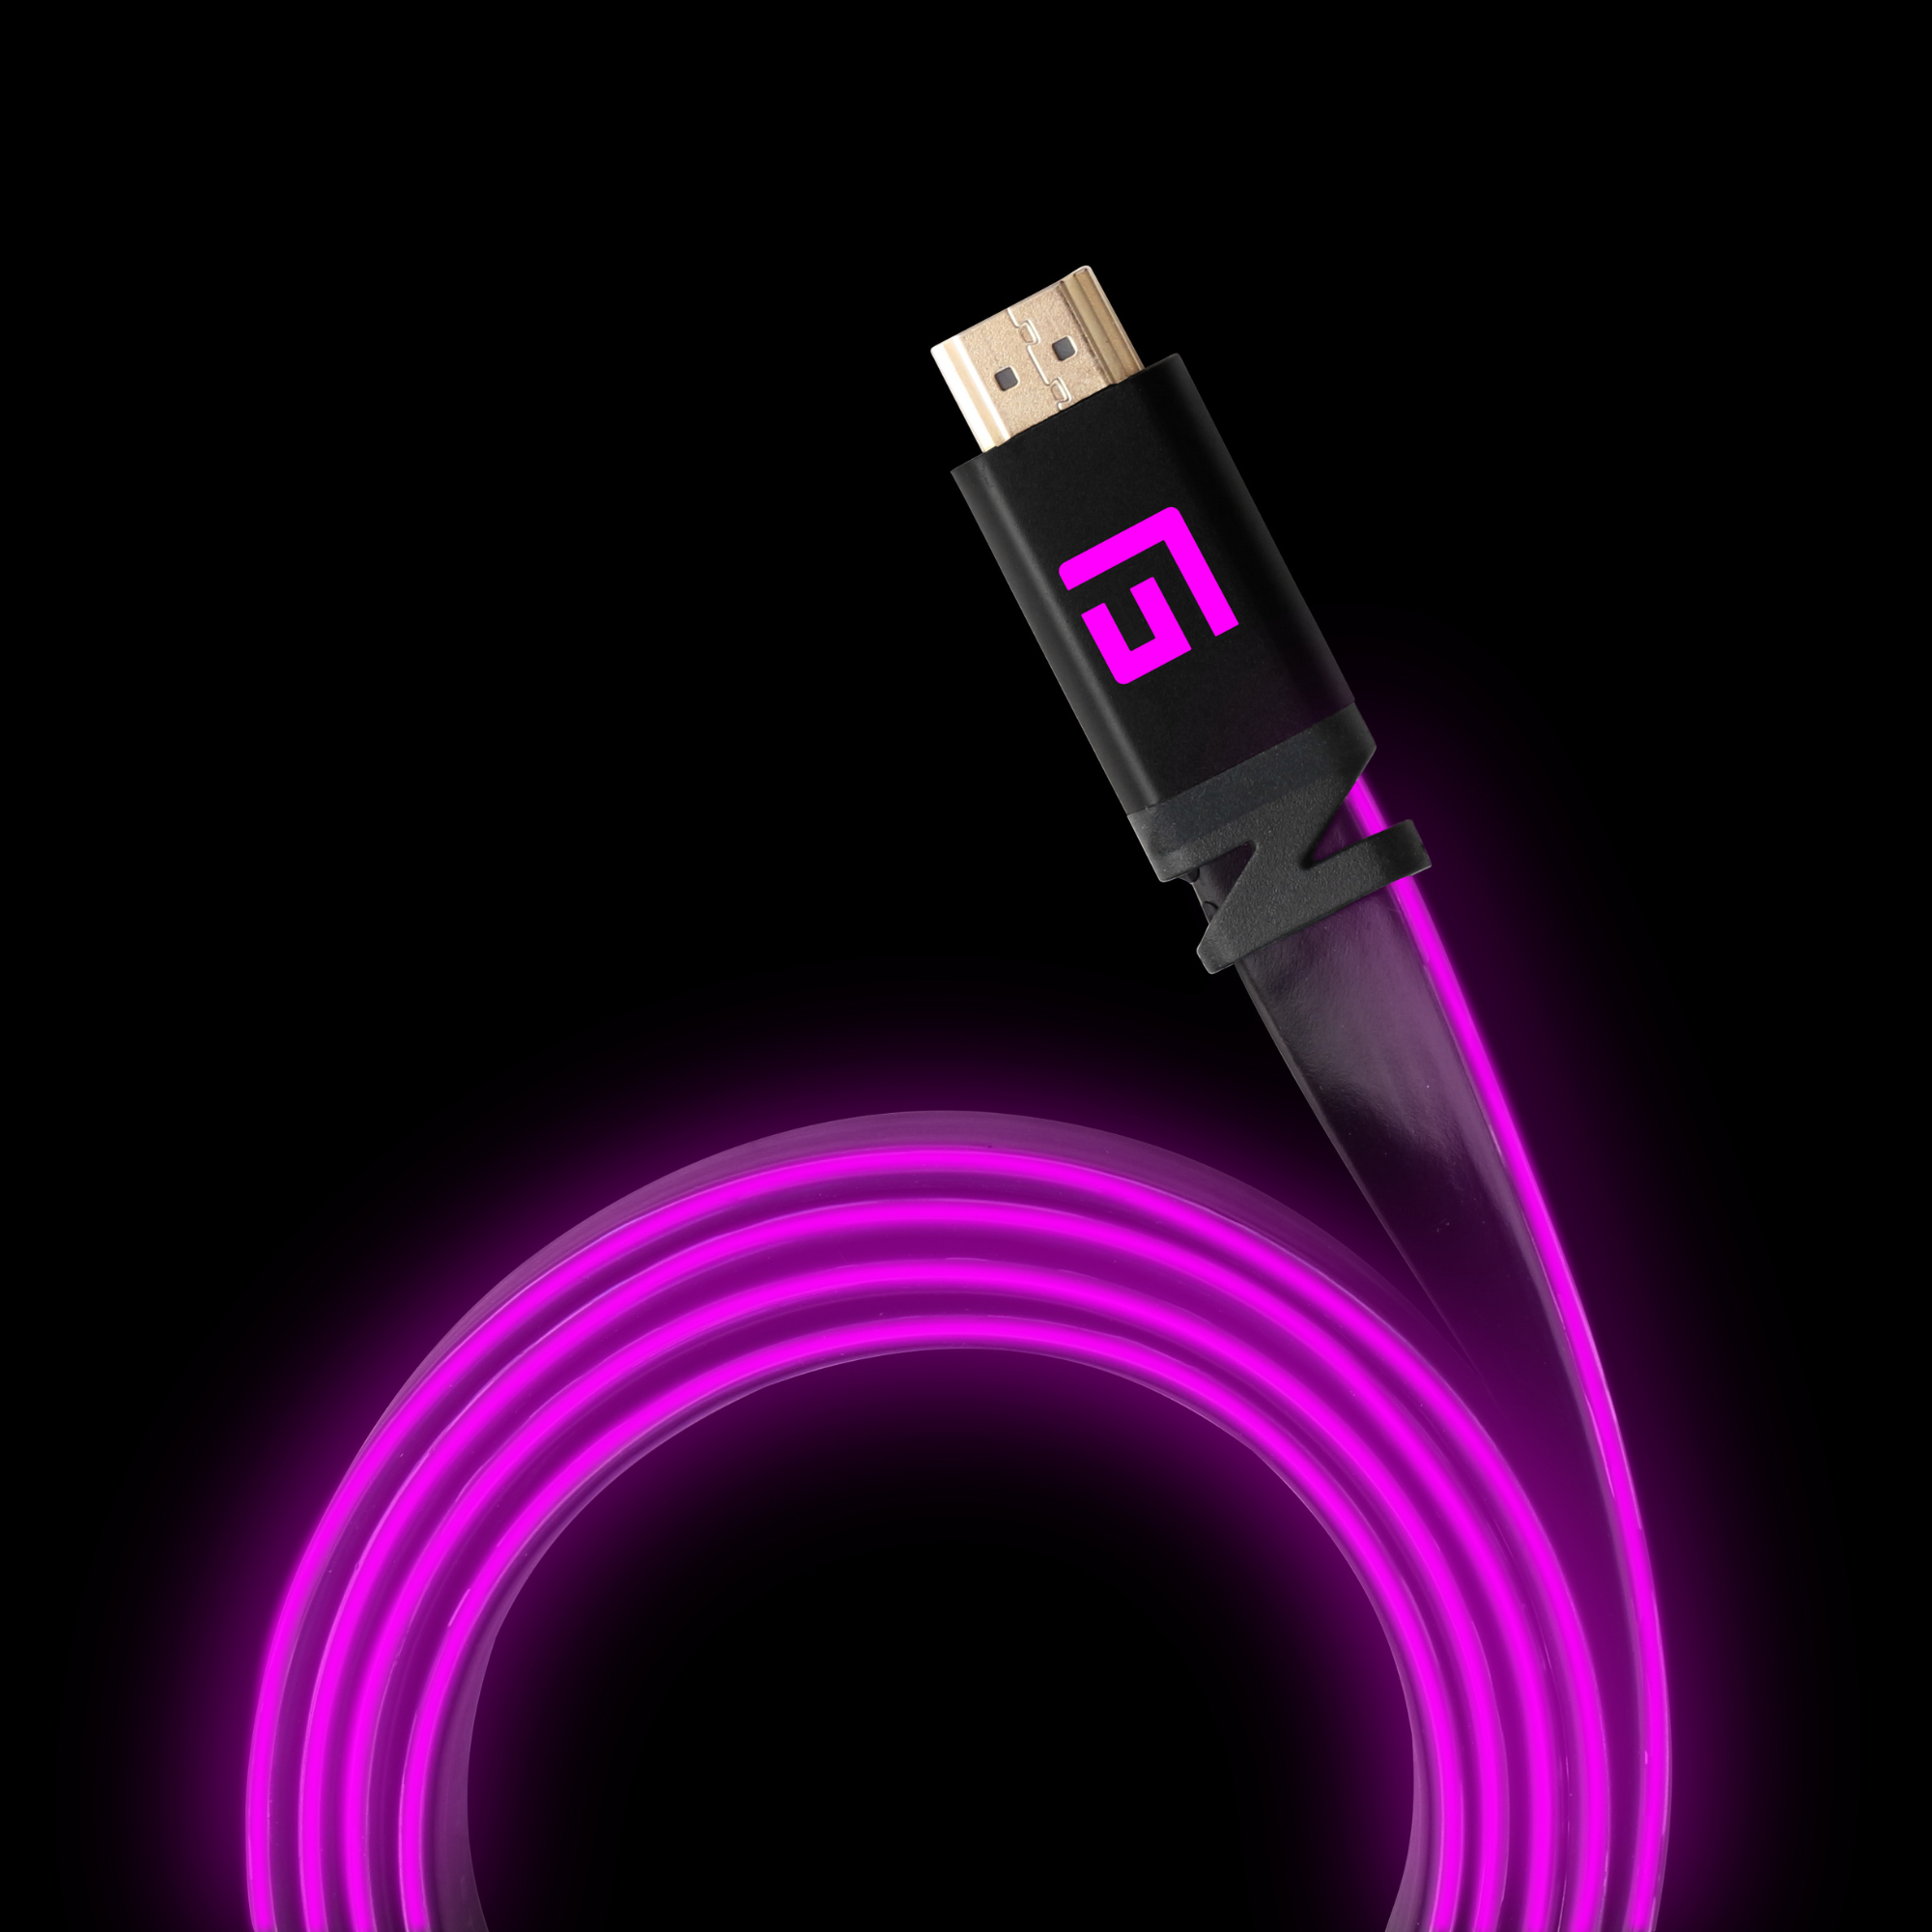 Flowing LED Lights USB-C (Type-C) Charge and Sync Cable - Pink